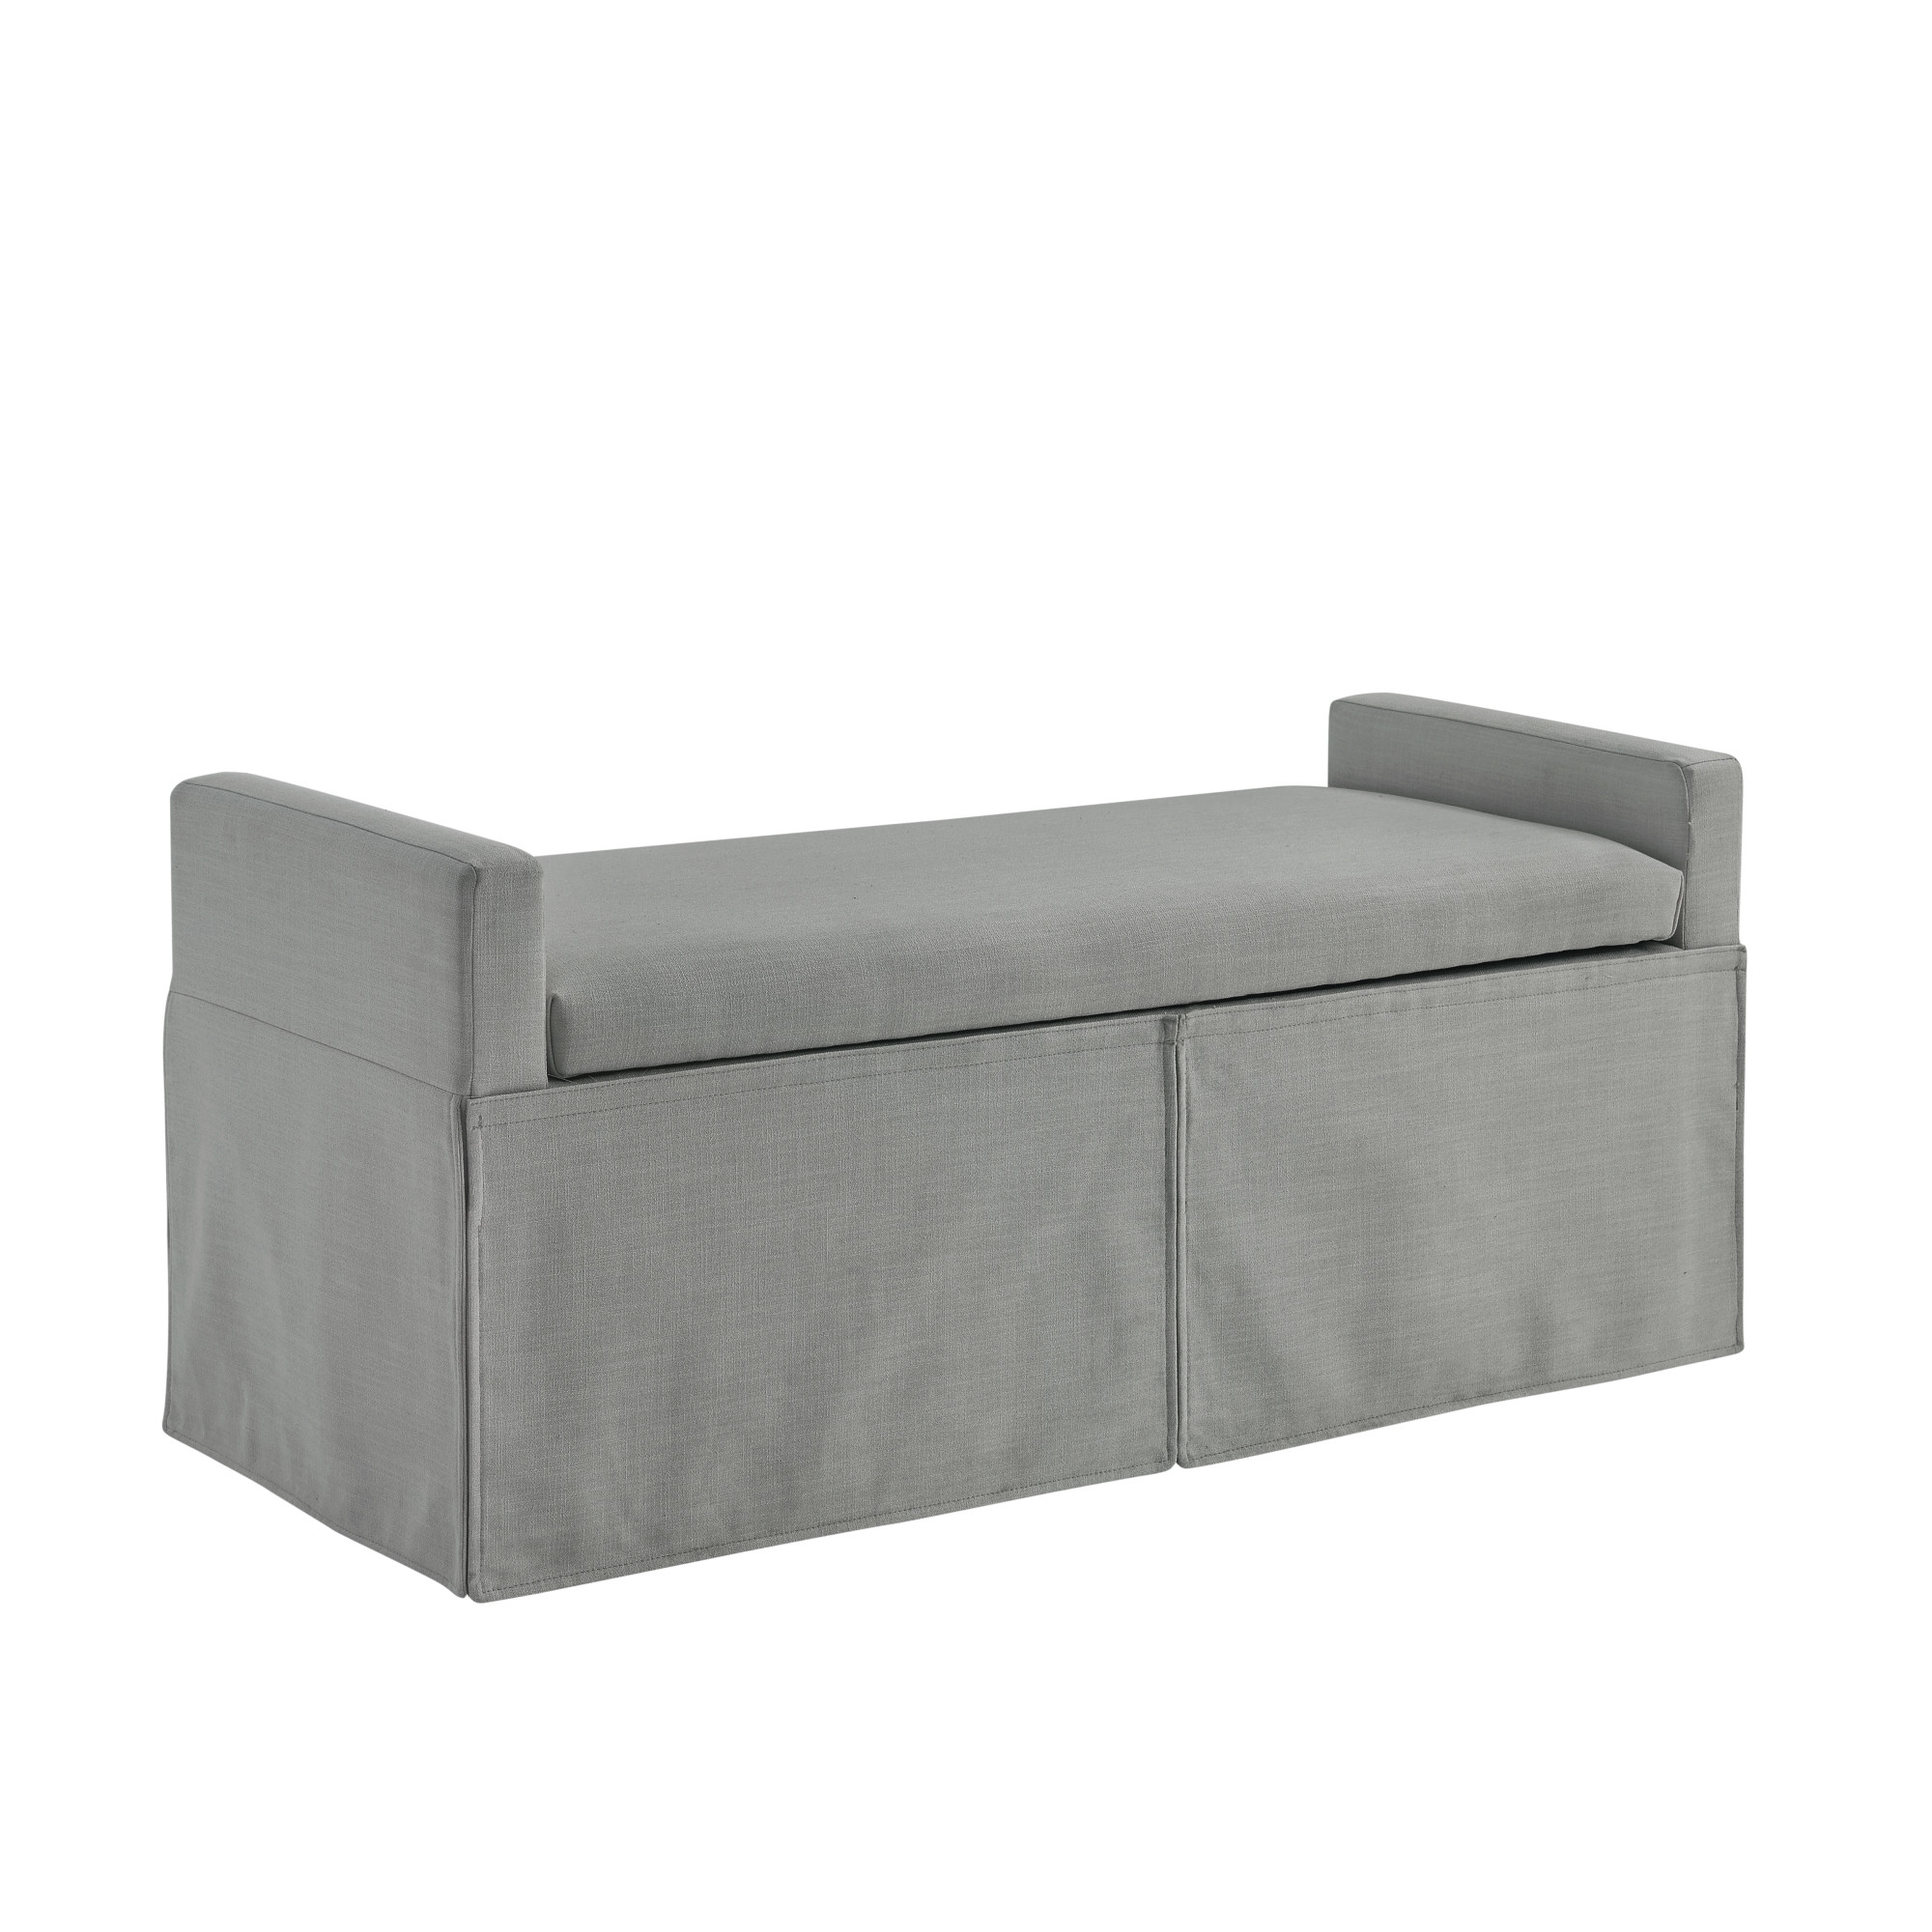 50" Light Gray Upholstered Linen Bench with Flip top, Shoe Storage-530678-1